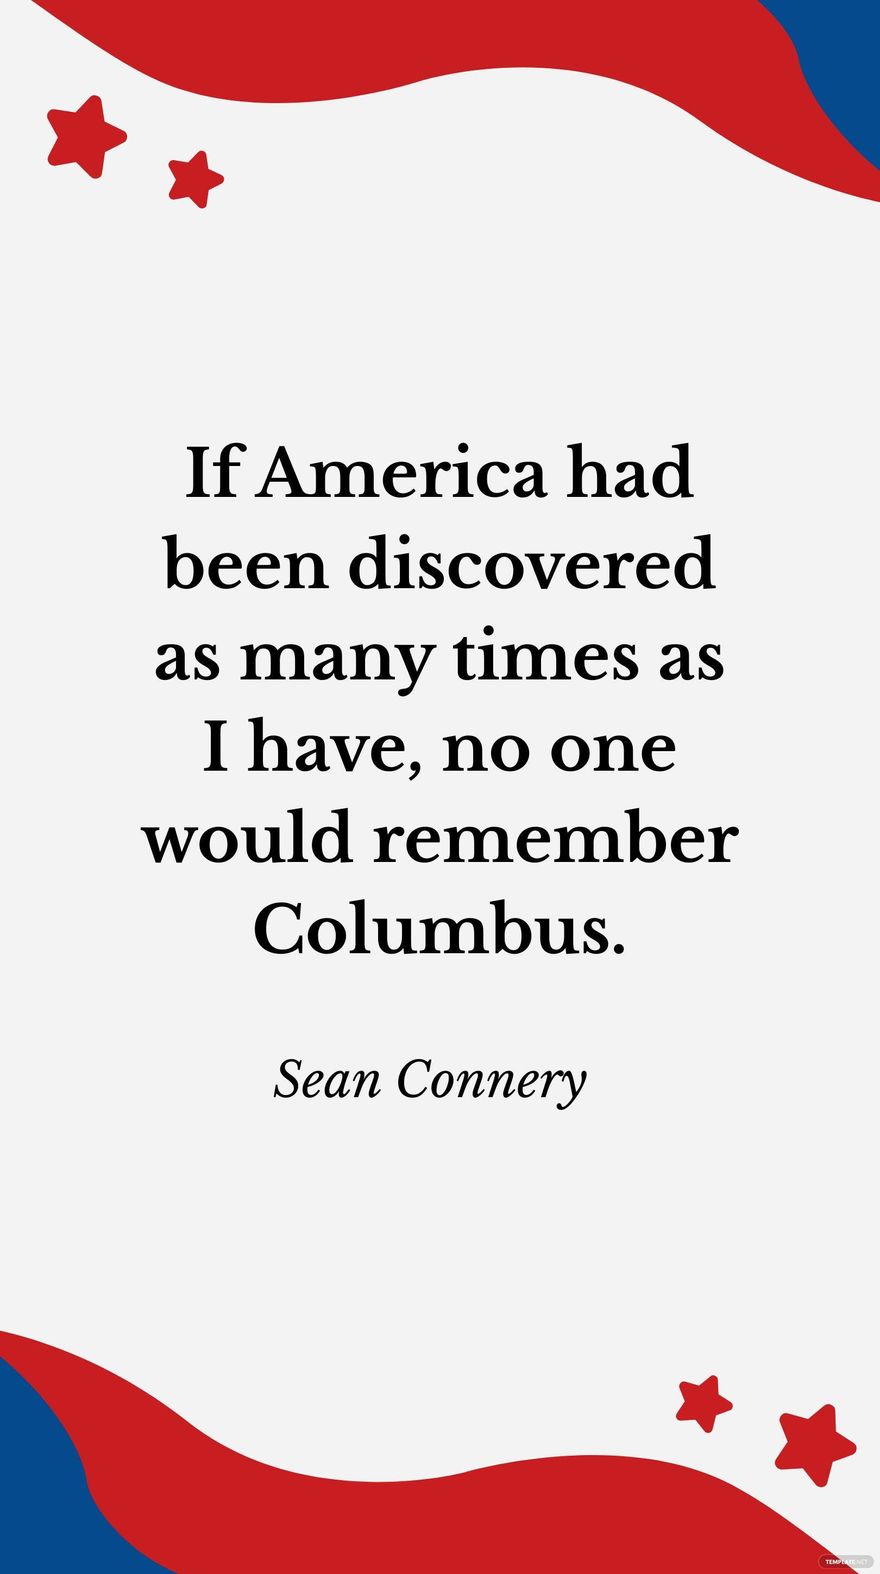 Free Sean Connery- If America had been discovered as many times as I have, no one would remember Columbus. in JPG